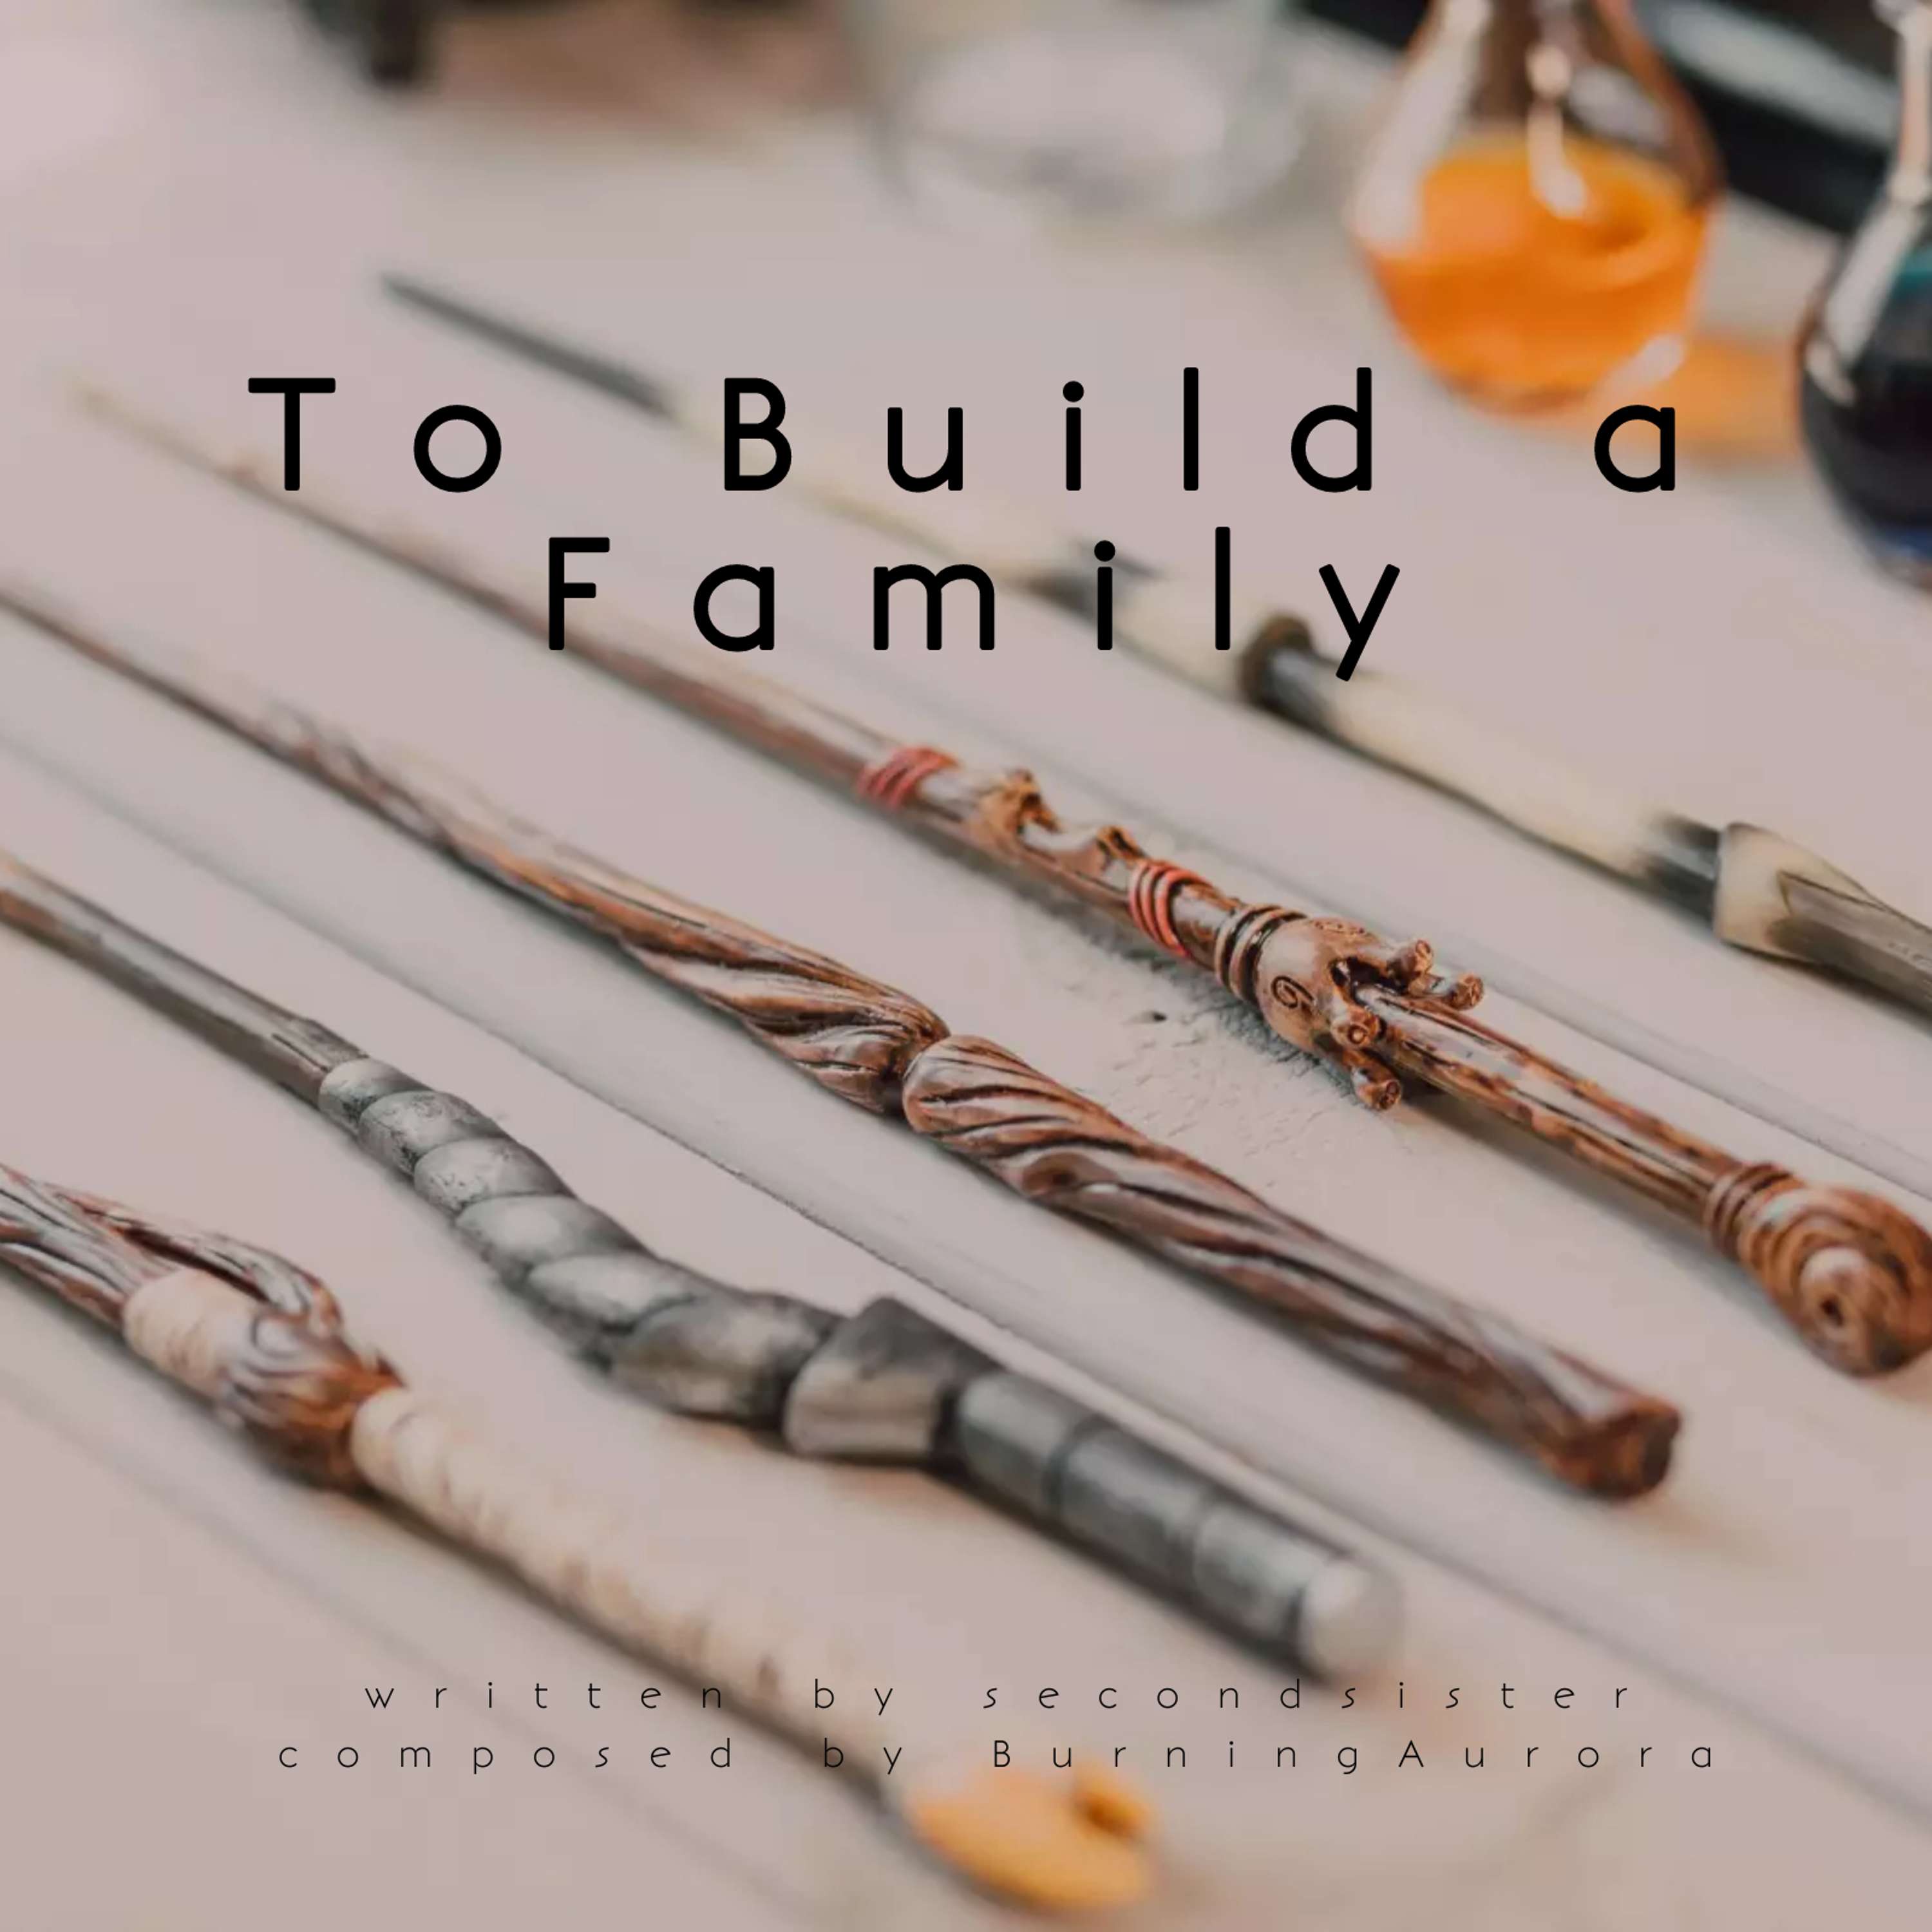 To Build a Family by secondsister